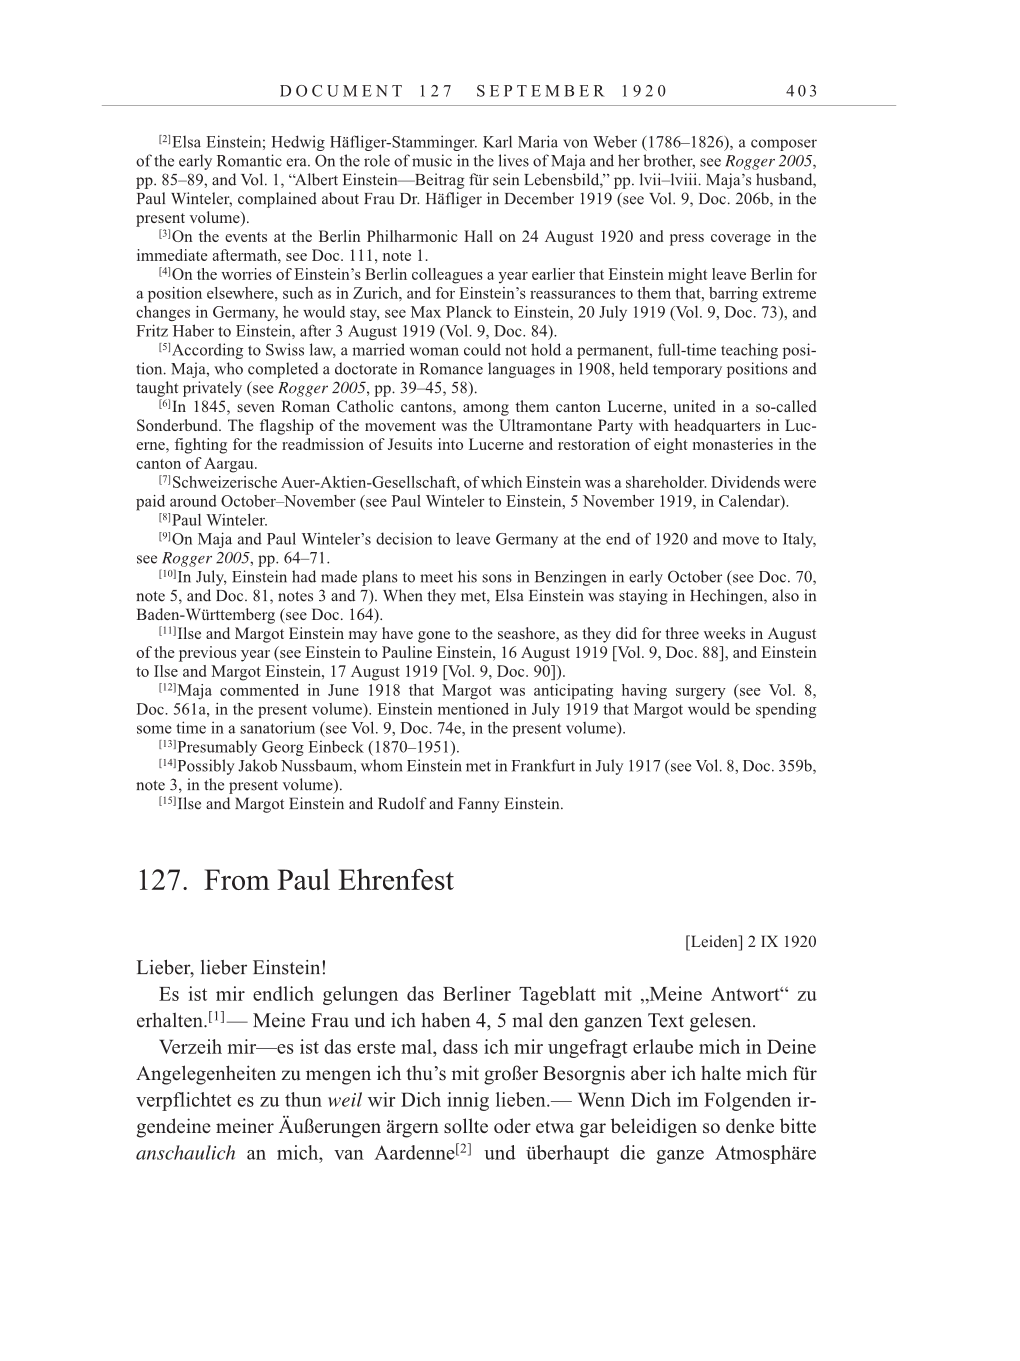 Volume 10: The Berlin Years: Correspondence May-December 1920 / Supplementary Correspondence 1909-1920 page 403